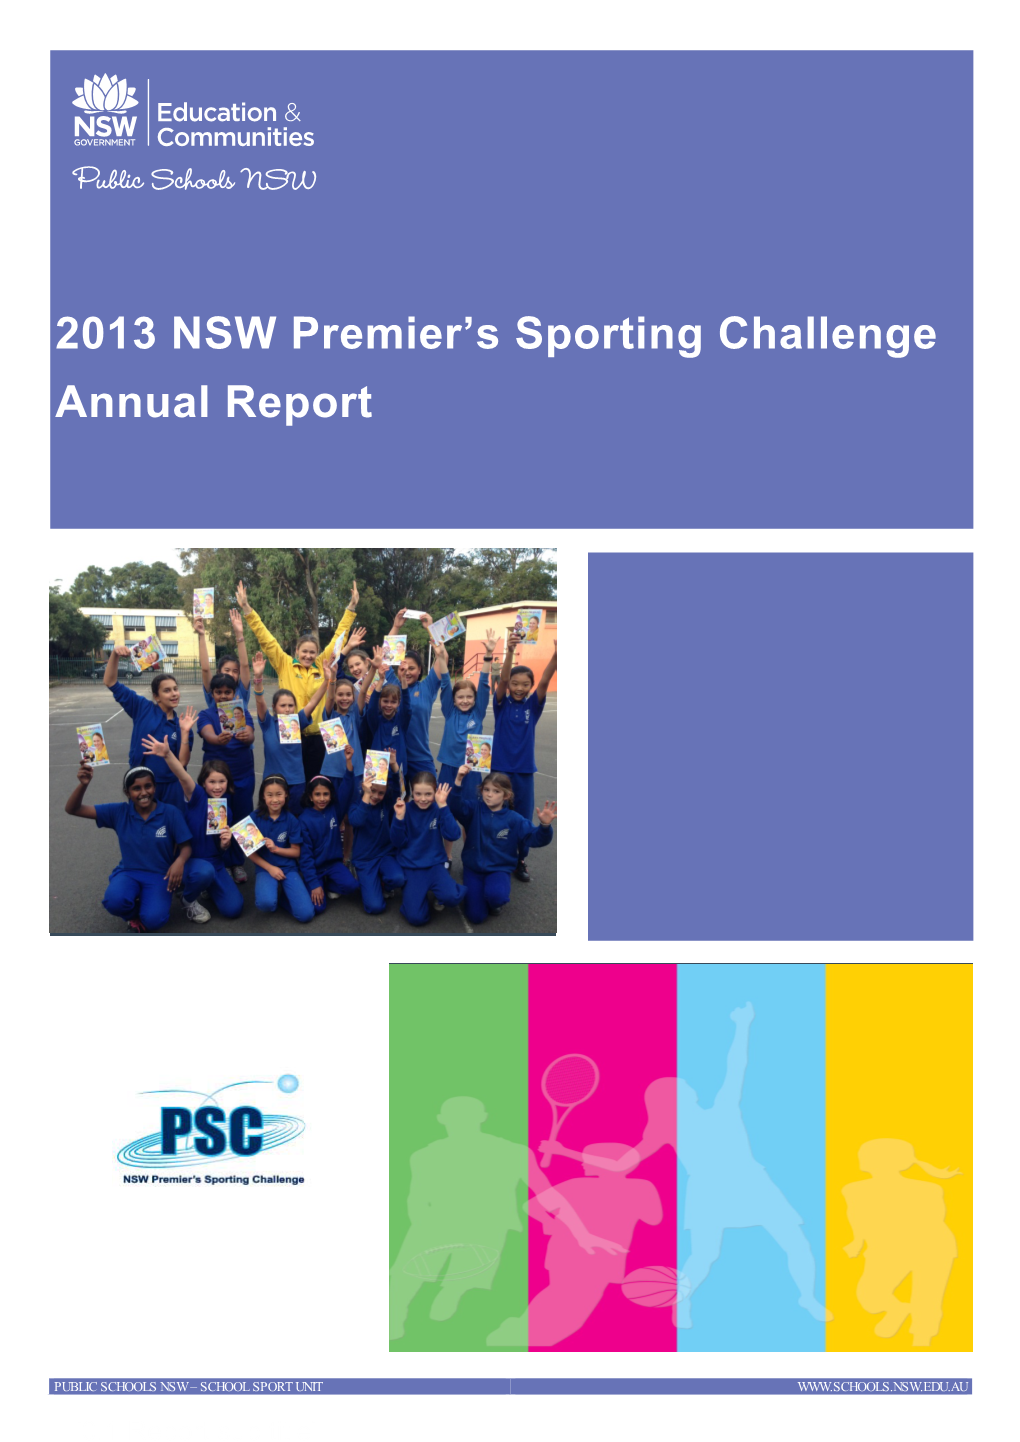 2013 NSW Premier's Sporting Challenge Annual Report